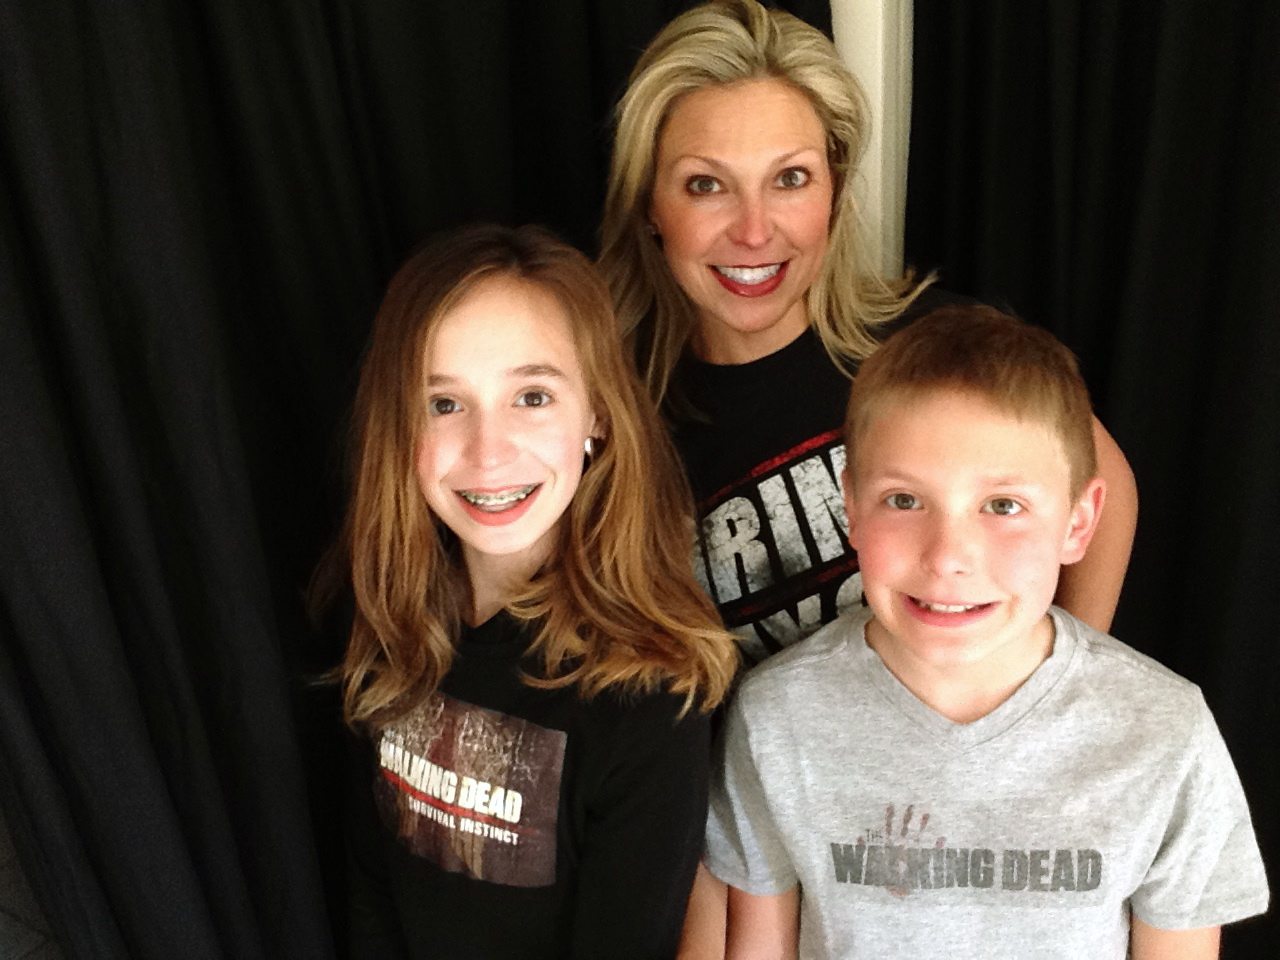 This March 29, 2016 photo released by Ericka Calcagno, center, shows her with her daughter Gina Binder, 12, left, and son Jean-Luc Binder, 9, wearing T-shirts from, &quot;The Walking Dead,&quot; at their home in Farmington Hills, Mich. Calcagno says her husband first introduced her to the series and her kids were intrigued by their conversations about it. And now they all watch the popular zombie show as a family.